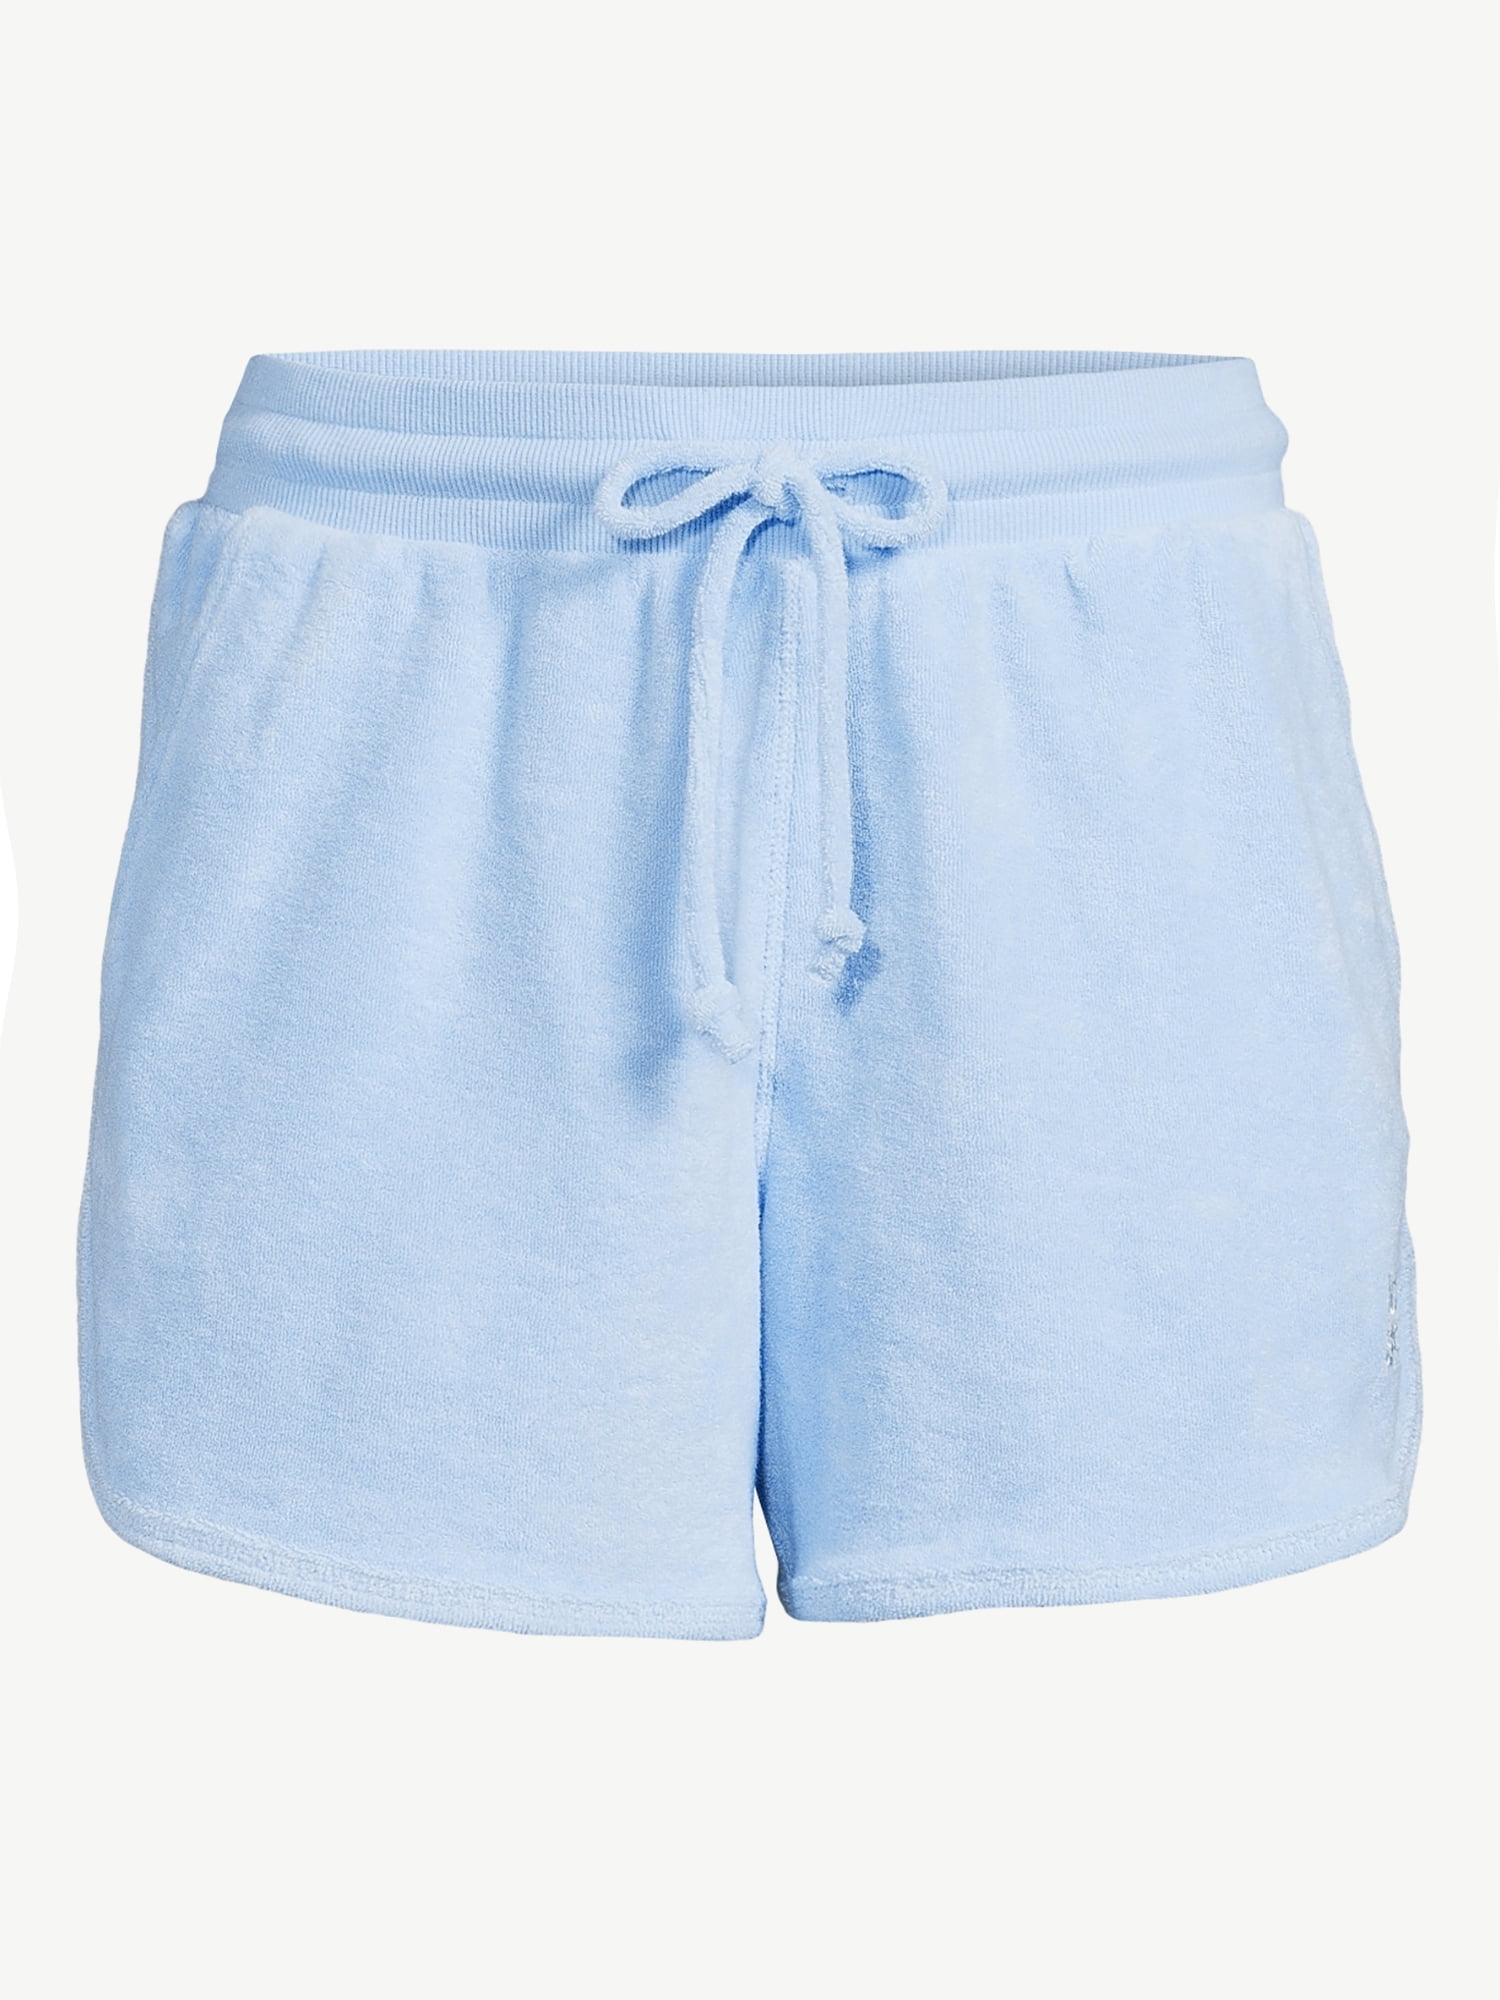 Vintage 70s Terry Cloth Pastel Baby Blue Shorts 